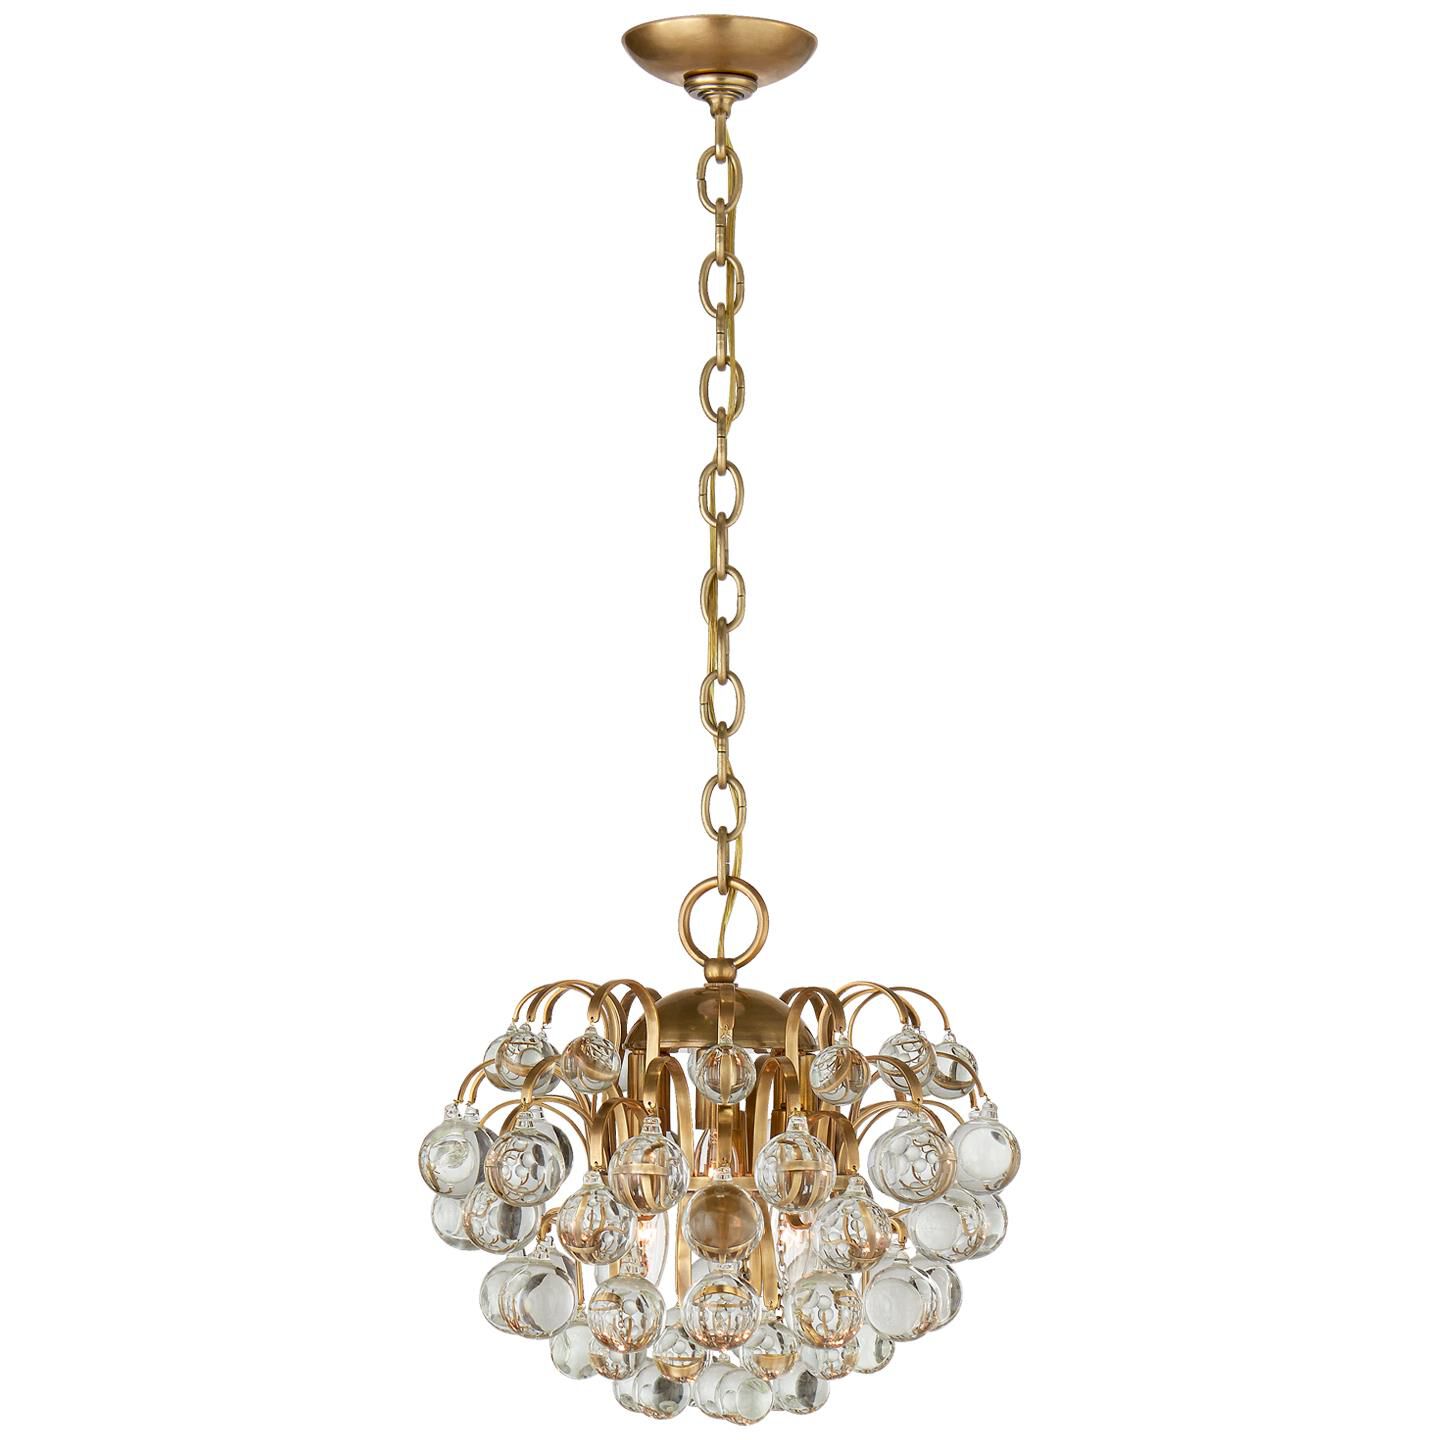 Joe Nye Regency Large Chandelier in Hand-Rubbed Antique Brass with See